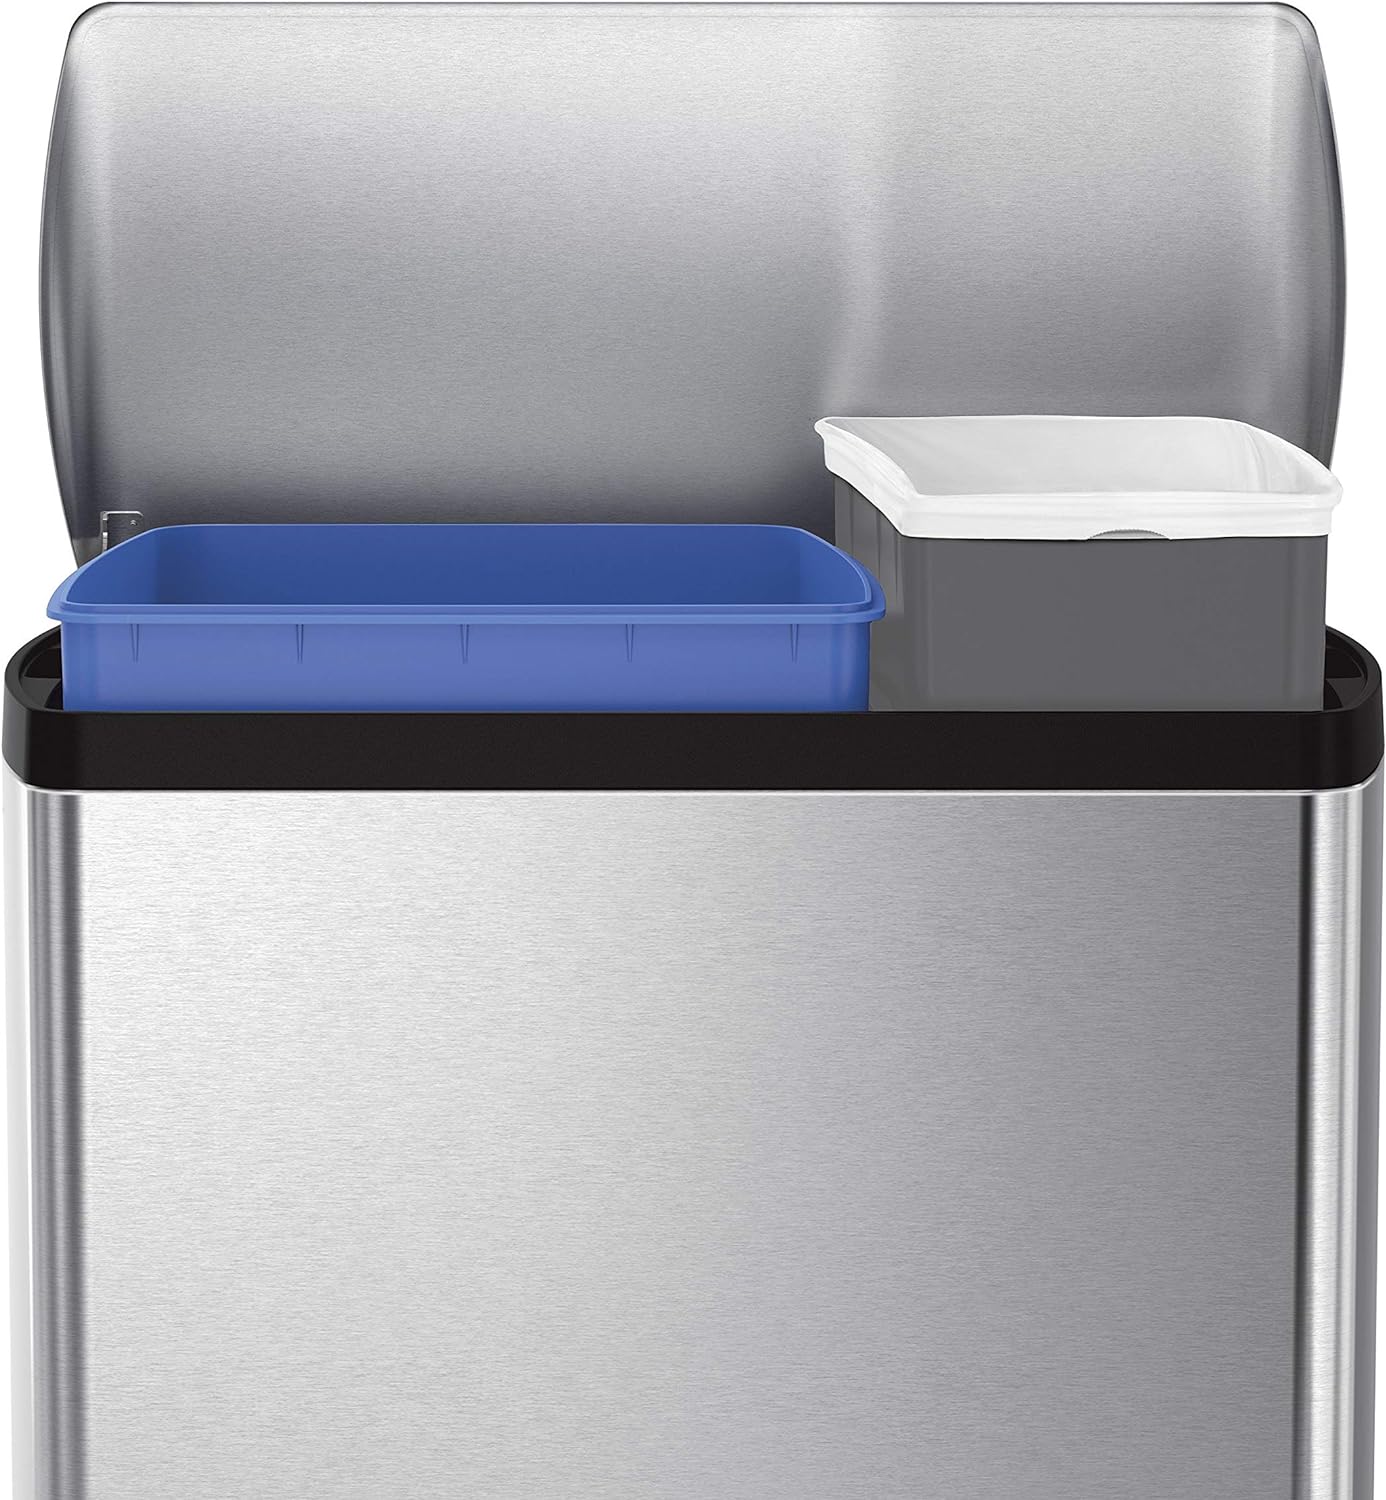 https://bigbigmart.com/wp-content/uploads/2023/10/simplehuman-Rectangular-Dual-Compartment-Recycling-Kitchen-Step-Trash-Can-46-Liter-Brushed-Stainless-Steel1.jpg